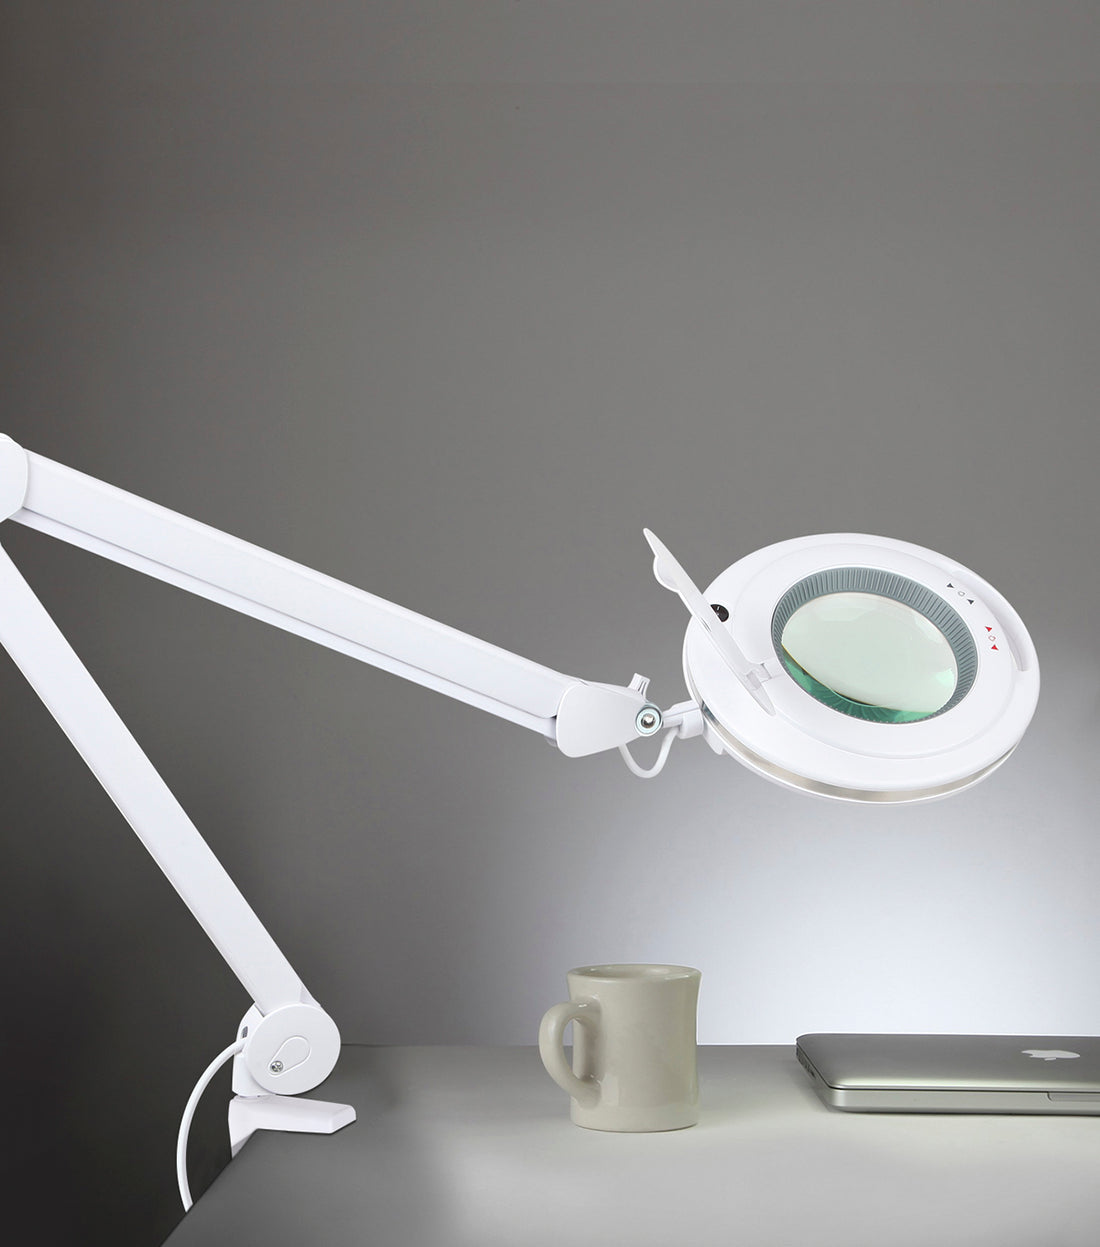 Brightech LightView Pro Magnifying Lamp & Table Clamp - Max Comfort - –  Lumez Lights